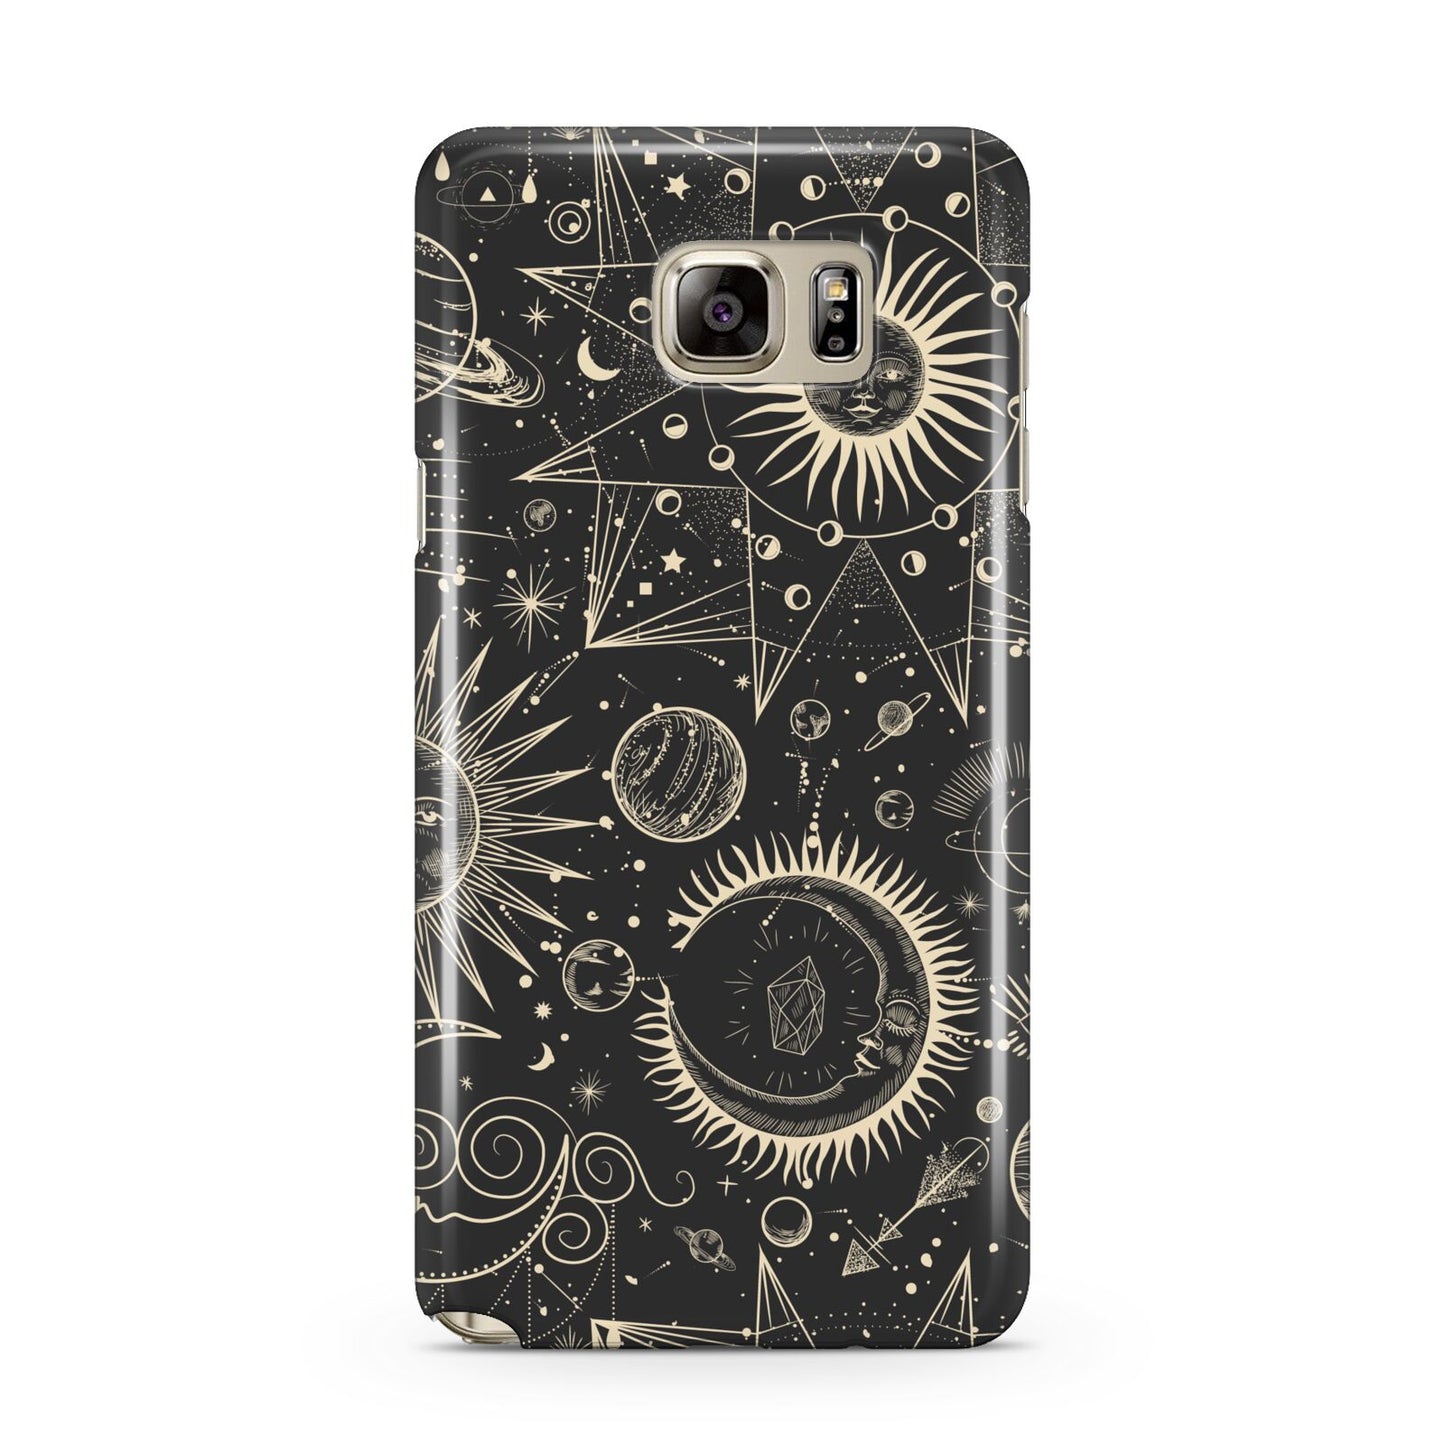 Moon Phases Samsung Galaxy Note 5 Case